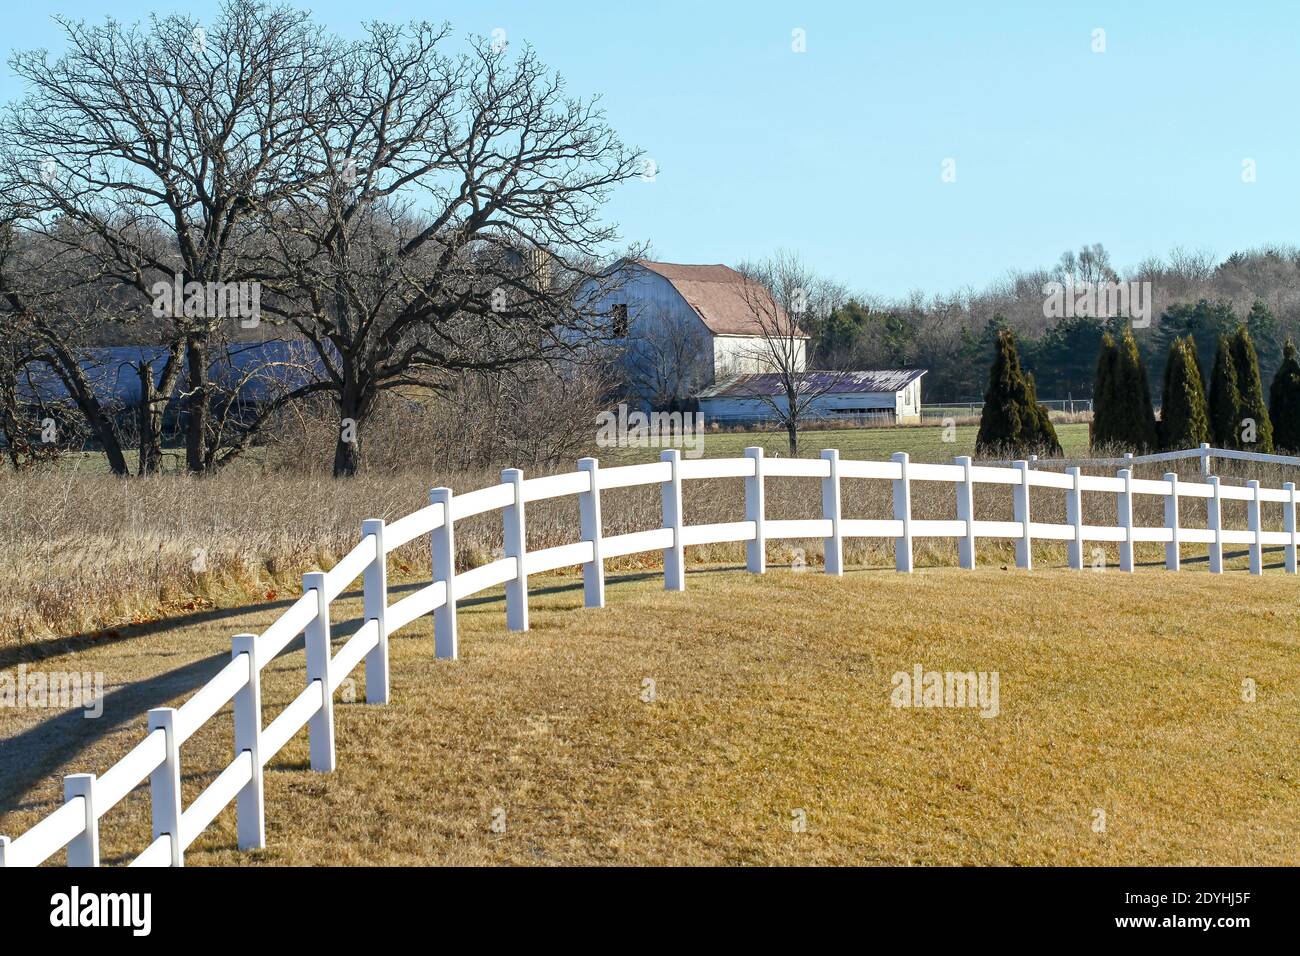 A snowless winter farm scene in rural Wisconsin with white picket fence and barn. Stock Photo